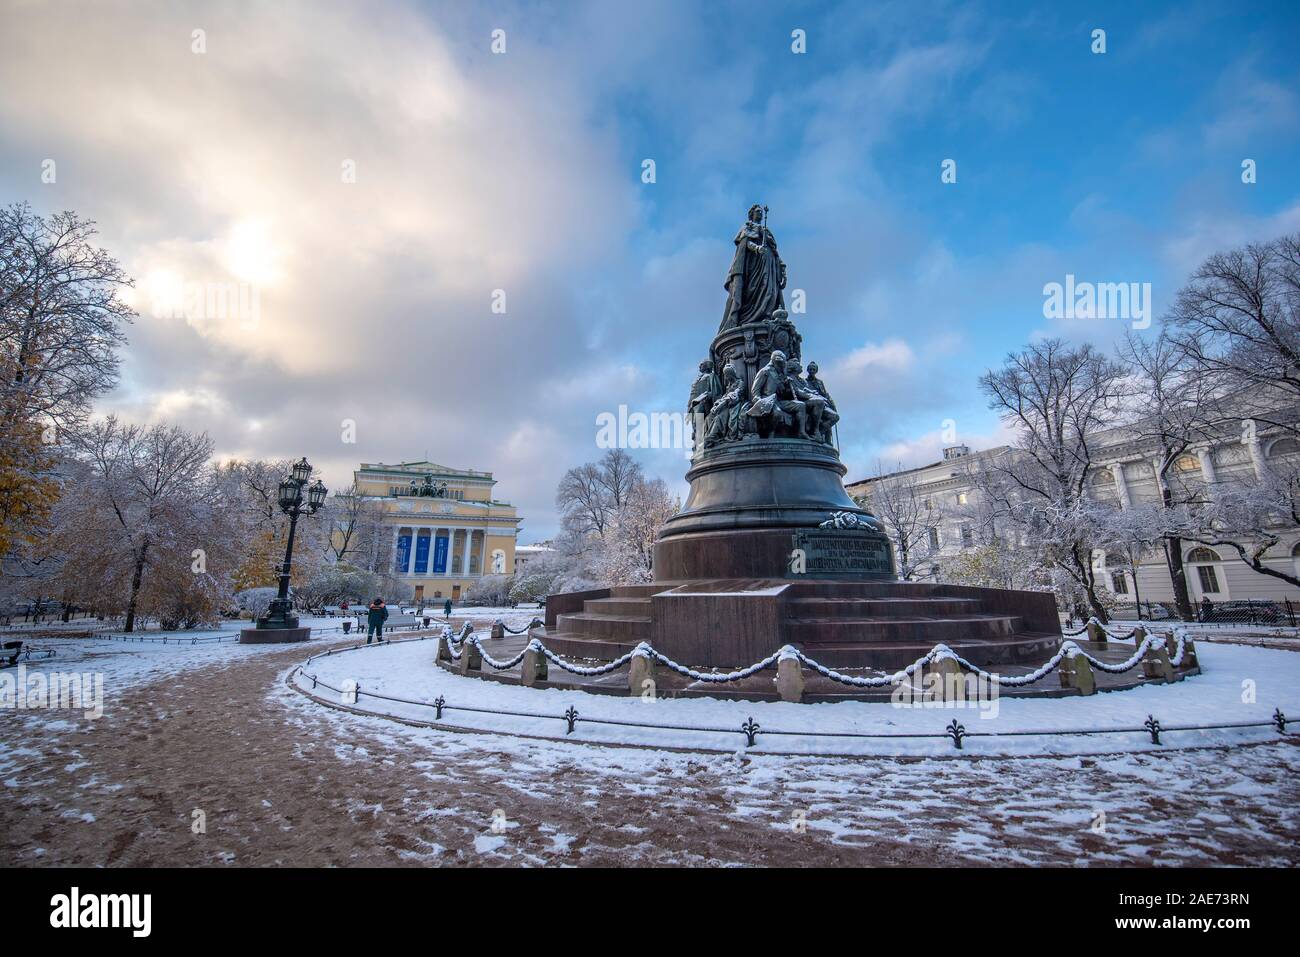 Saint Petersburg, Russia. The Monument to Catherine the Great II front of Alexandrinsky Theatre or Russian State Pushkin Theater at winter snow day. Stock Photo